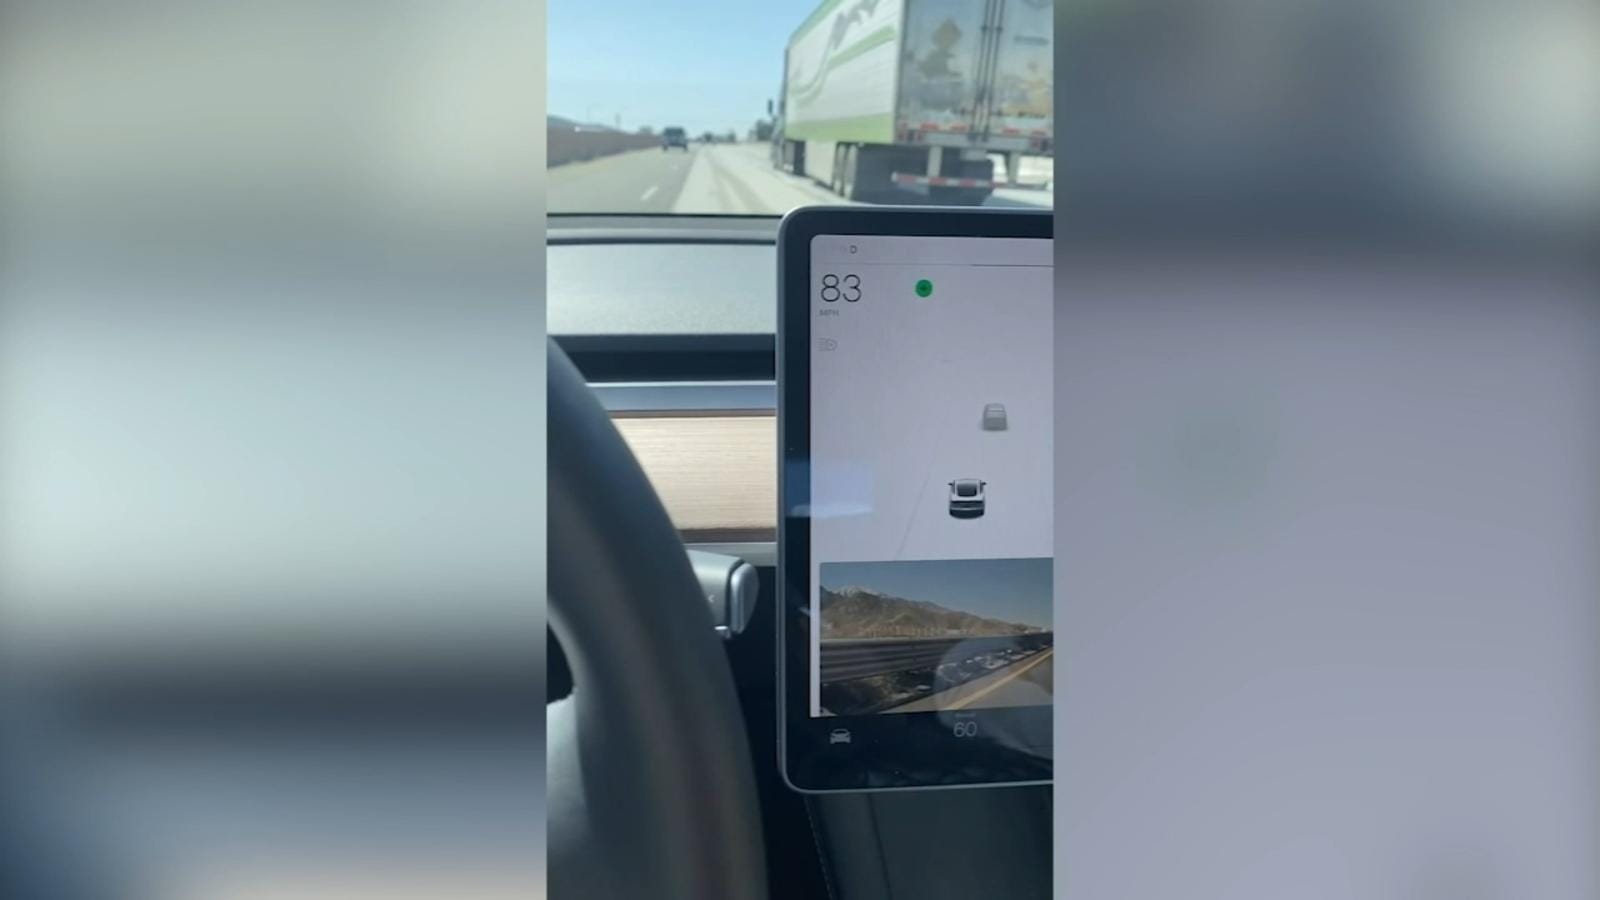 Irvine, California man says car computer on his new Tesla froze, causing  vehicle to be stuck at 83 mph on freeway - ABC7 New York